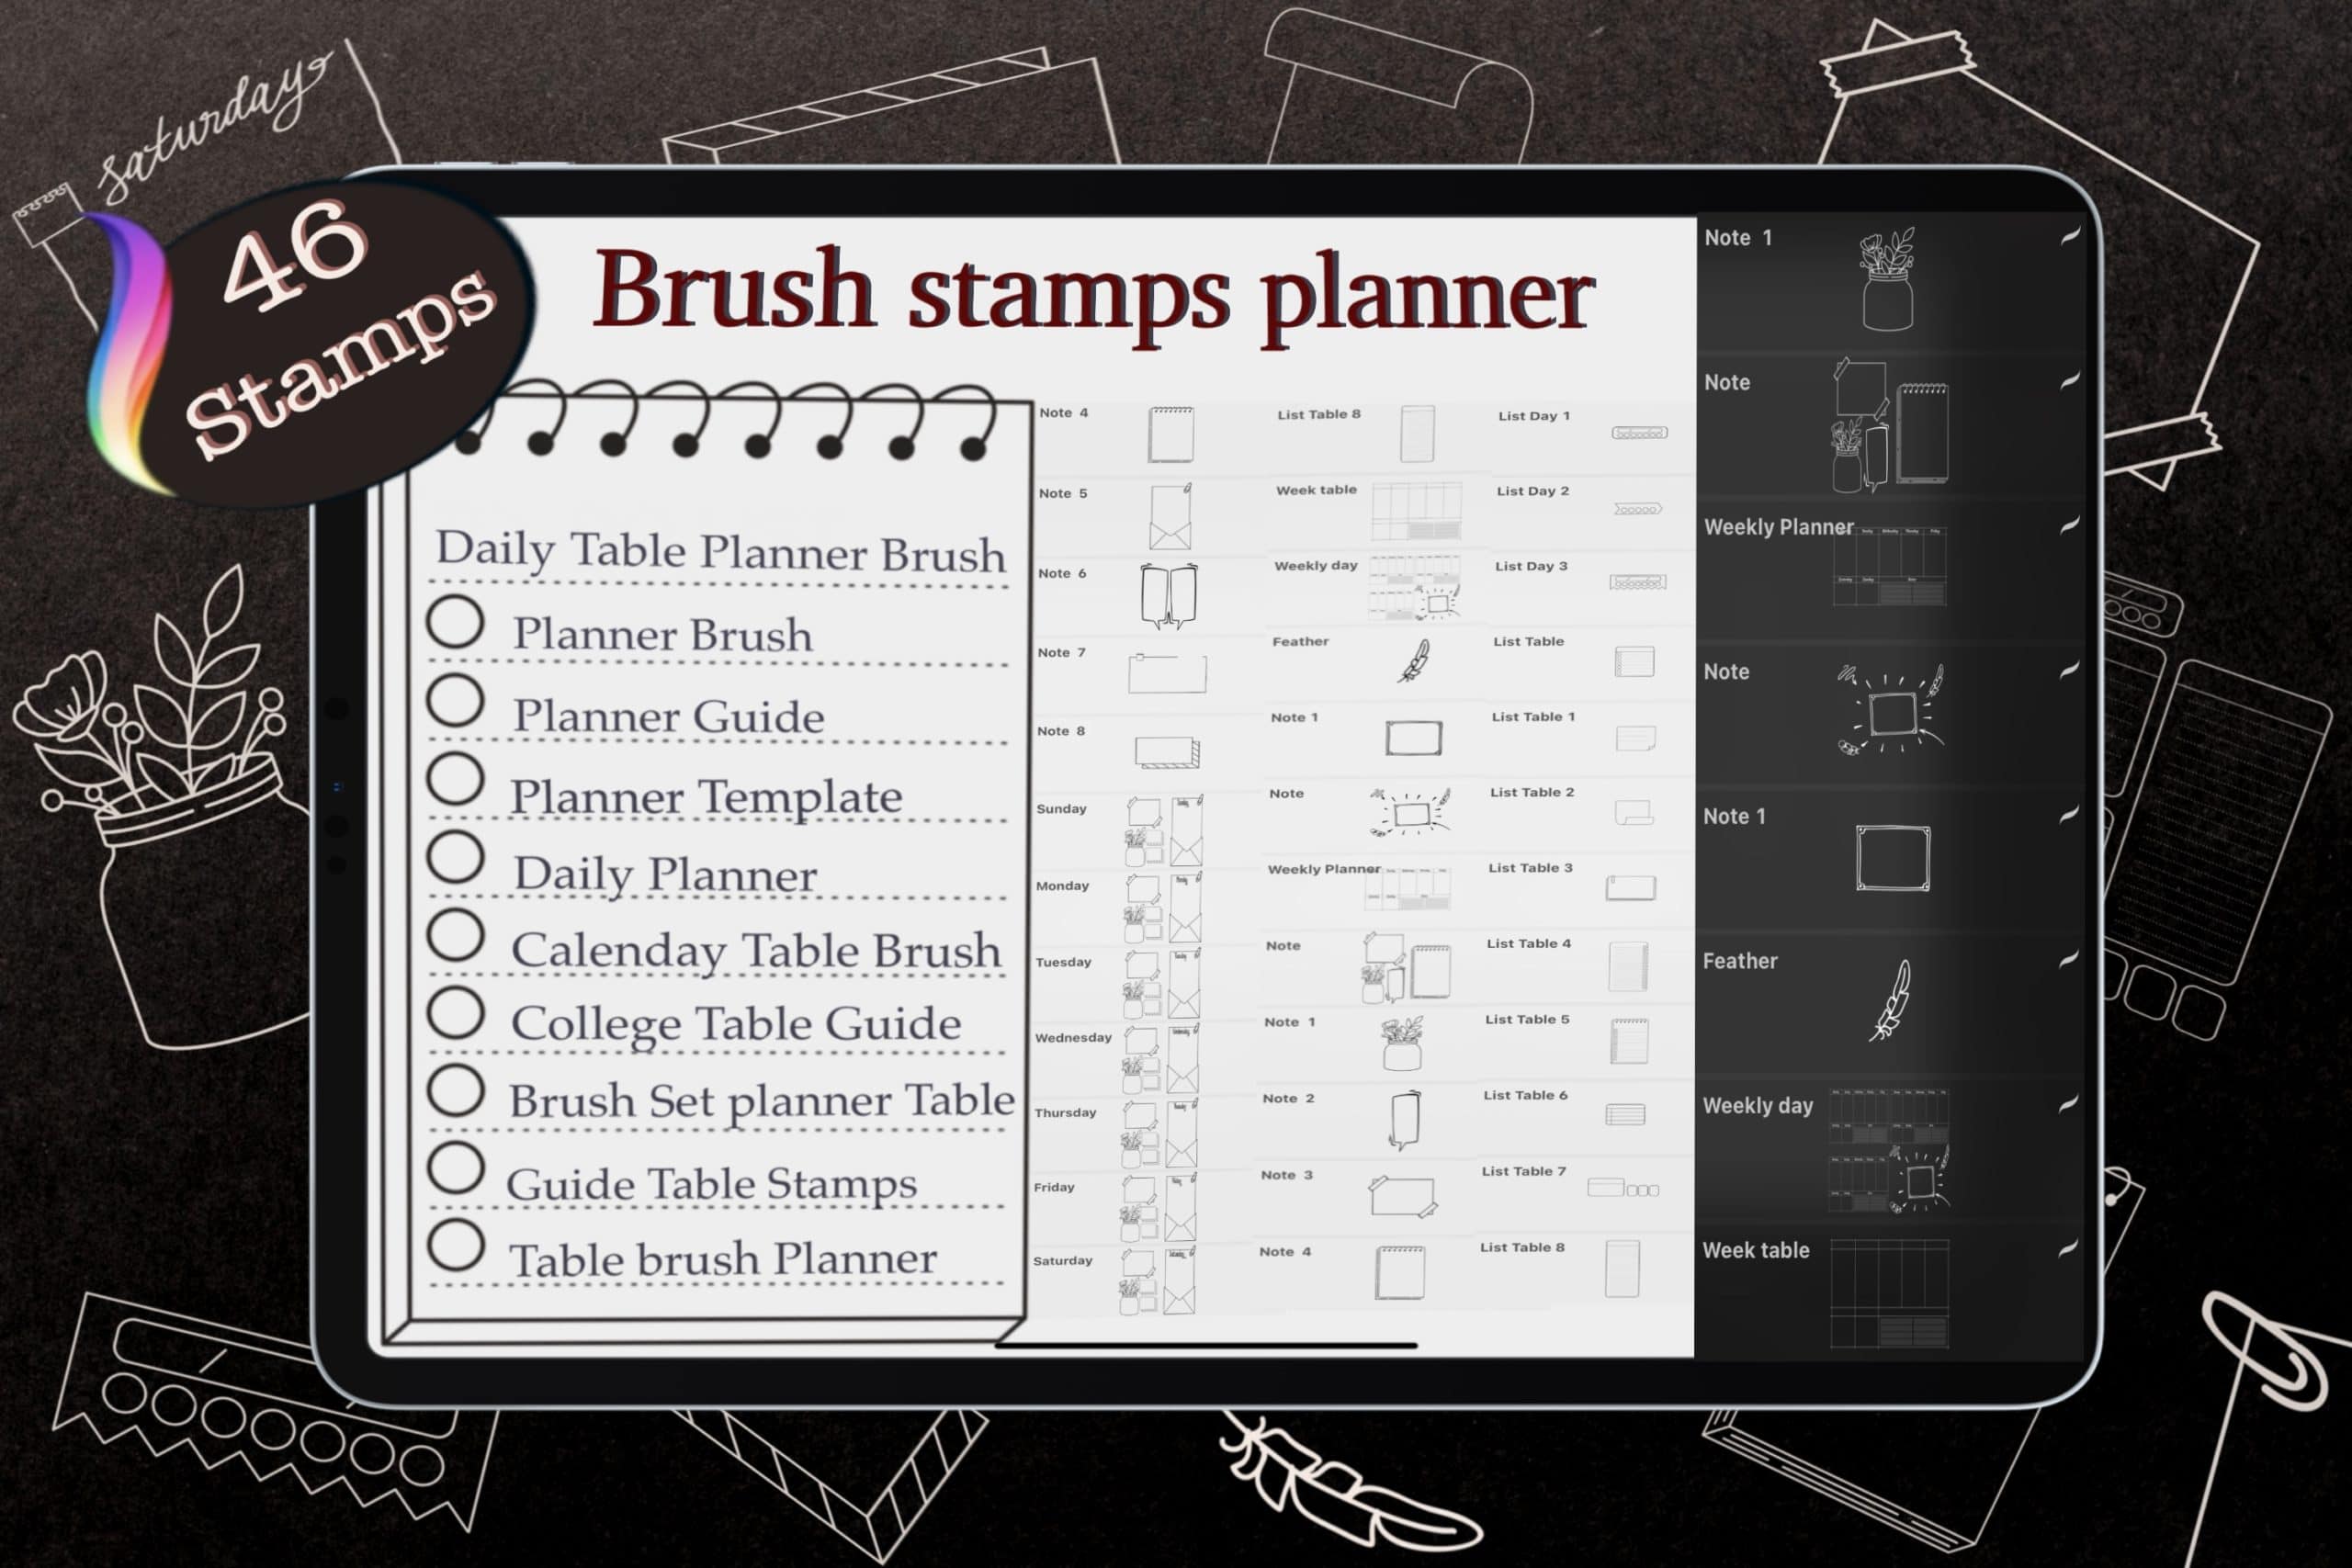 procreate planner brushes free